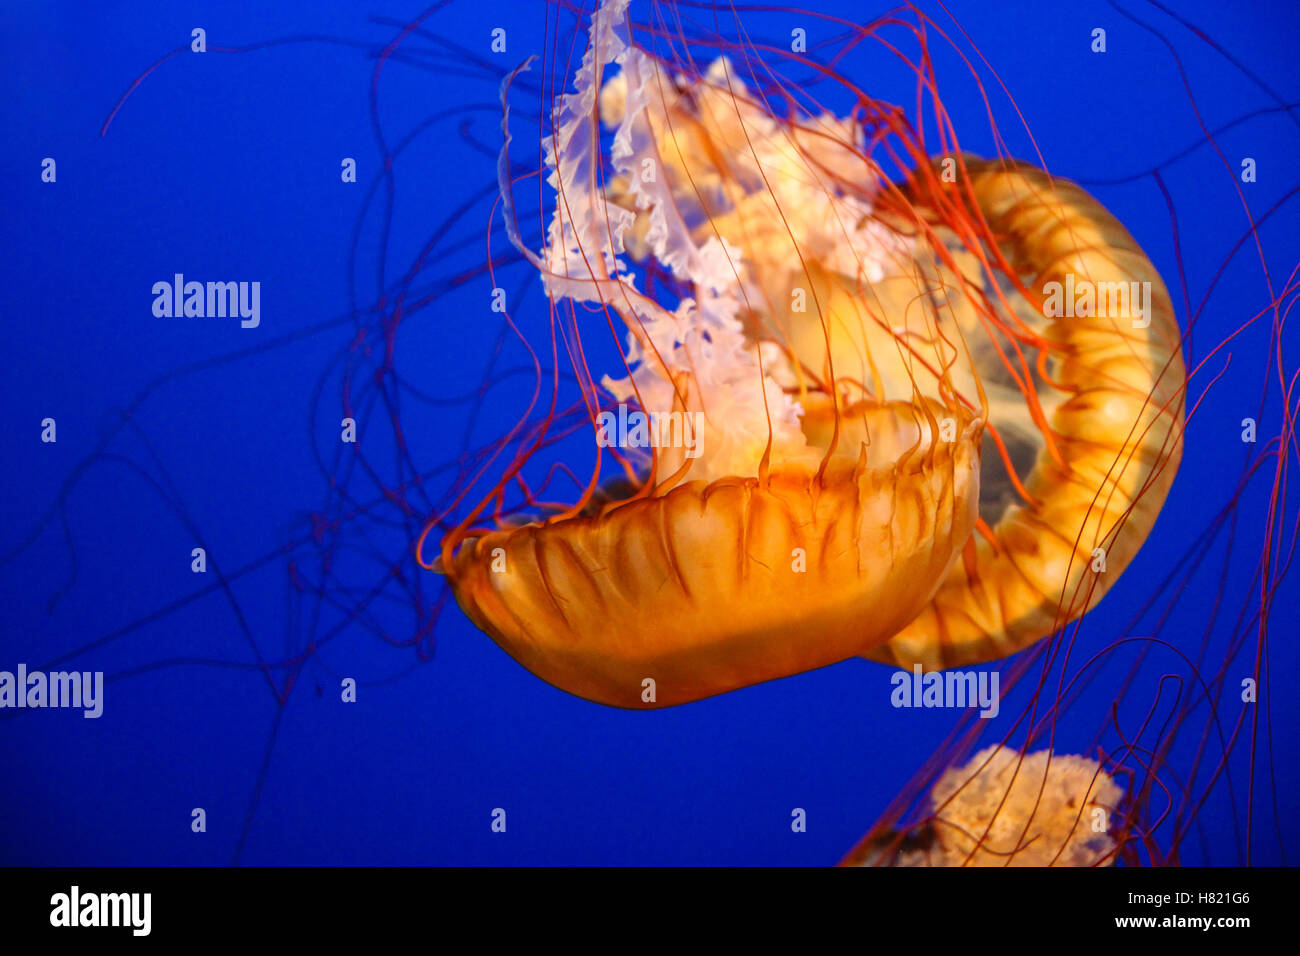 Beautiful Pacific sea nettle or west coast sea nettle jellyfish. They are a common free-floating scyphozoan that live in the Eas Stock Photo